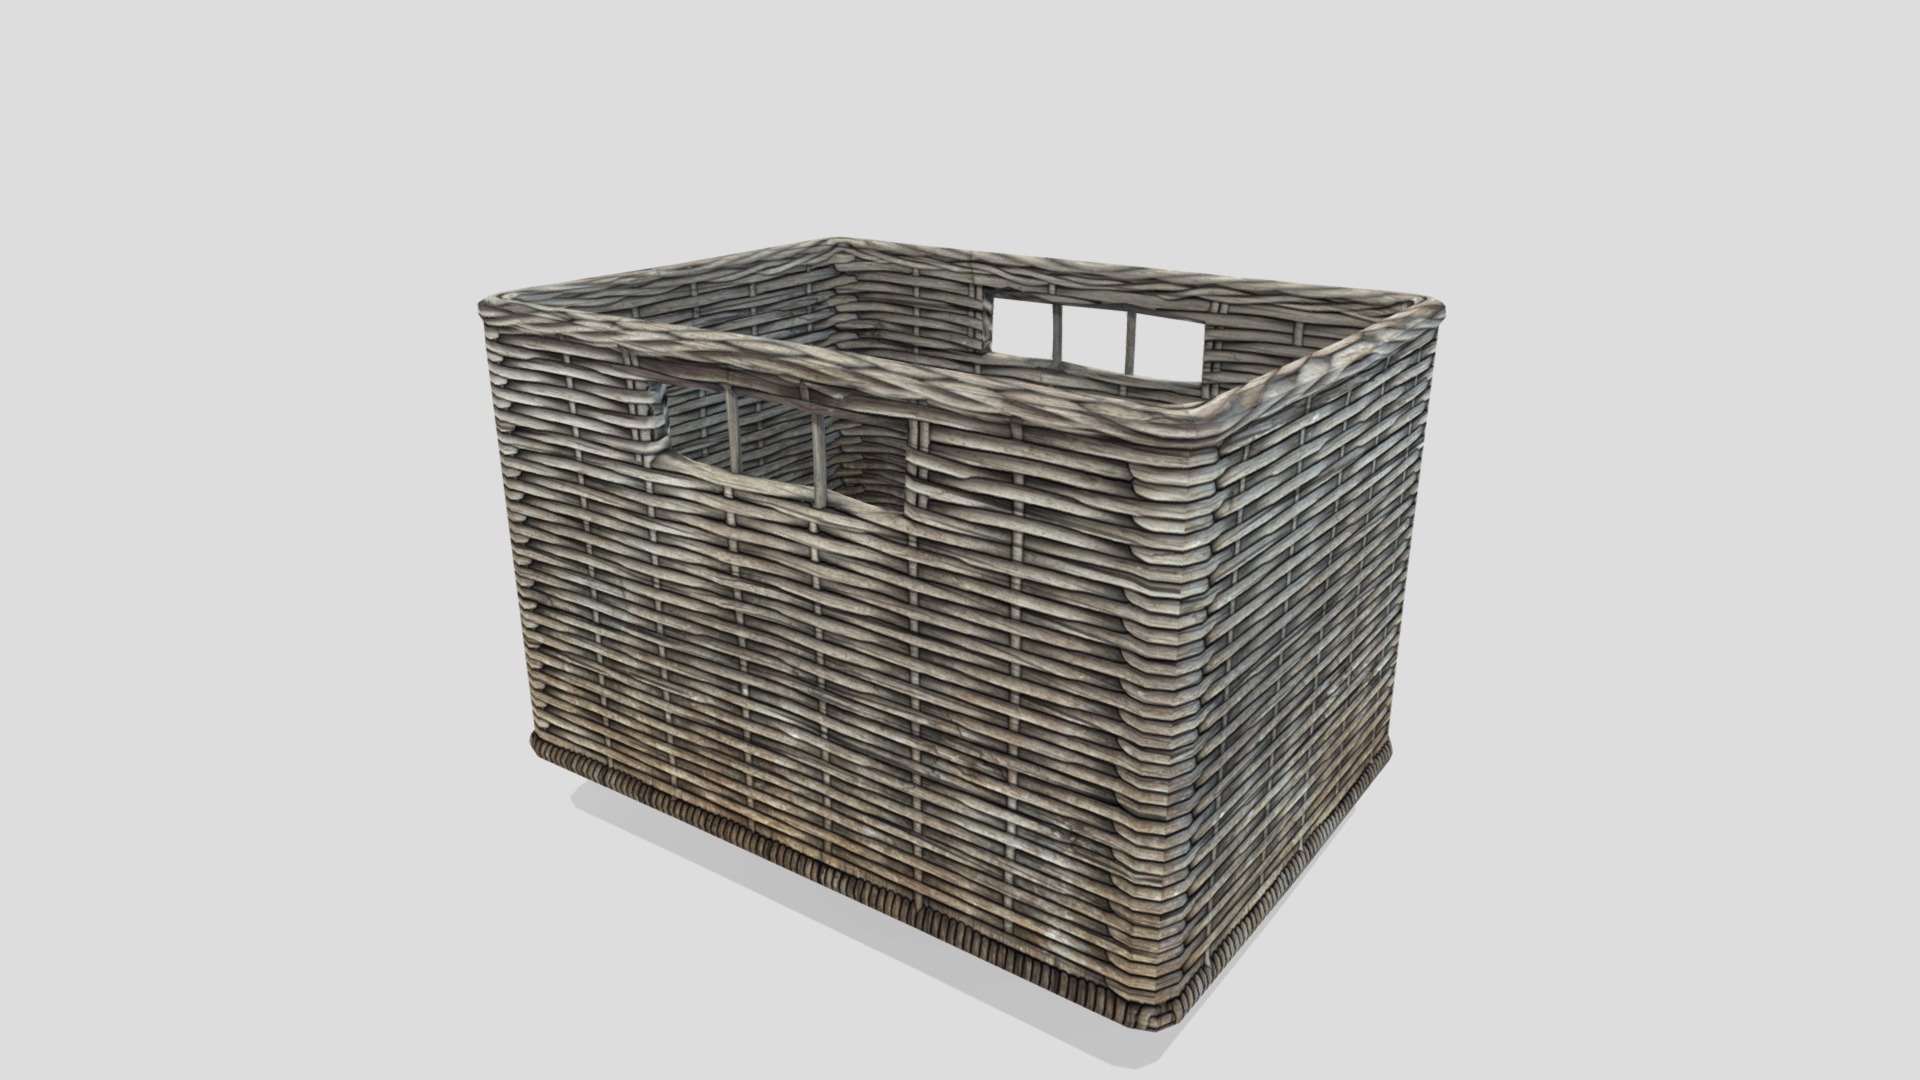 3D Straw basket
The pack has highly detailed basket ready for use in your project. Just drag and drop prefab into your scene and achieve beautiful results in no time. Available formats FBX, 3DS Max 2017



We are here to empower the creators. Please contact us via the [Contact US](https://aaanimators.com/#contact-area) page if you are having issues with our assets. 




The following document provides a highly detailed description of the asset:
[READ ME](https://medium.com/@aaanimators/3d-asset-pack-low-poly-tables-pack-arabic-21125c8bb0f7)




**Mesh complexities:**


Basket_03 801 verts; 1228  tris 



Includes 1 sets of textures with 4 materials:



● Diffuse

● Gloss

● Normal

● Specular - Straw Basket_03 - Buy Royalty Free 3D model by aaanimators 3d model